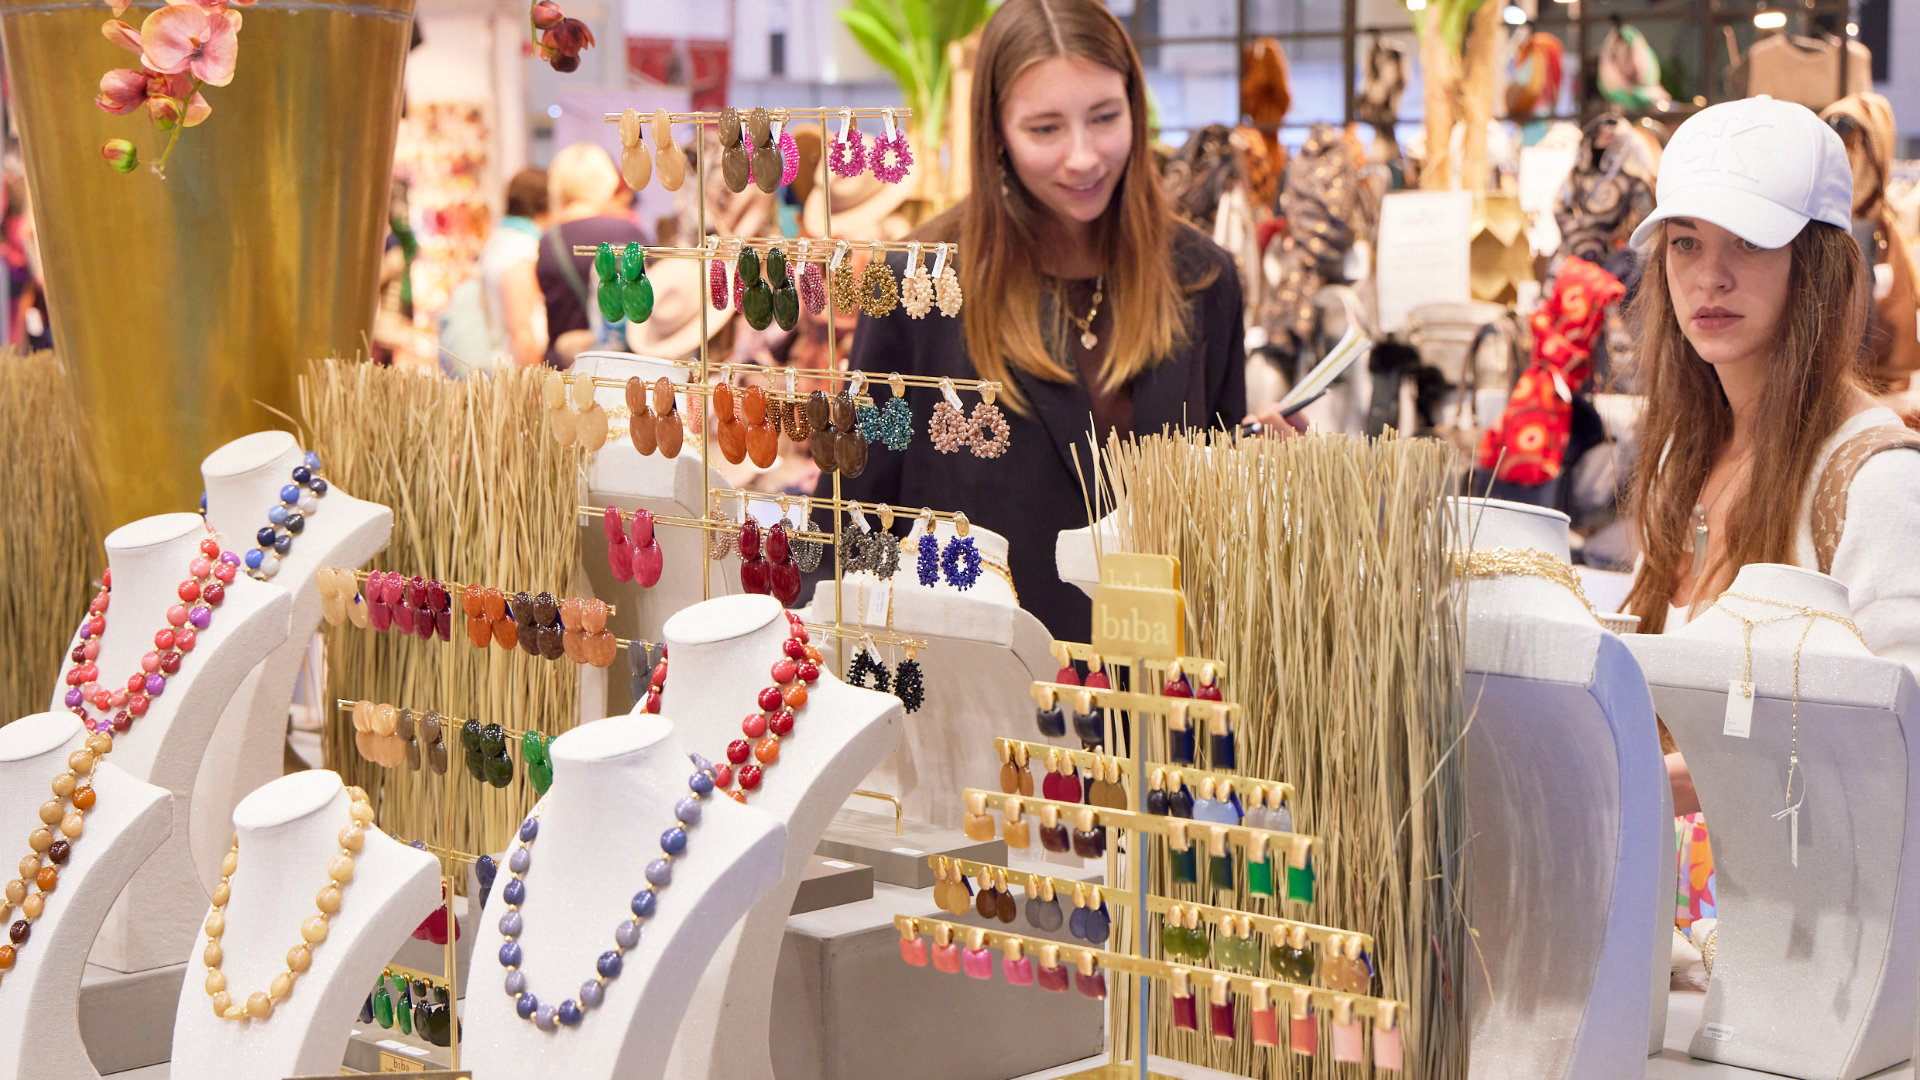 The Jewellery & Fashion area at Nordstil offers a unique variety of products. Photo: Messe Frankfurt/Jean-Luc Valentin.